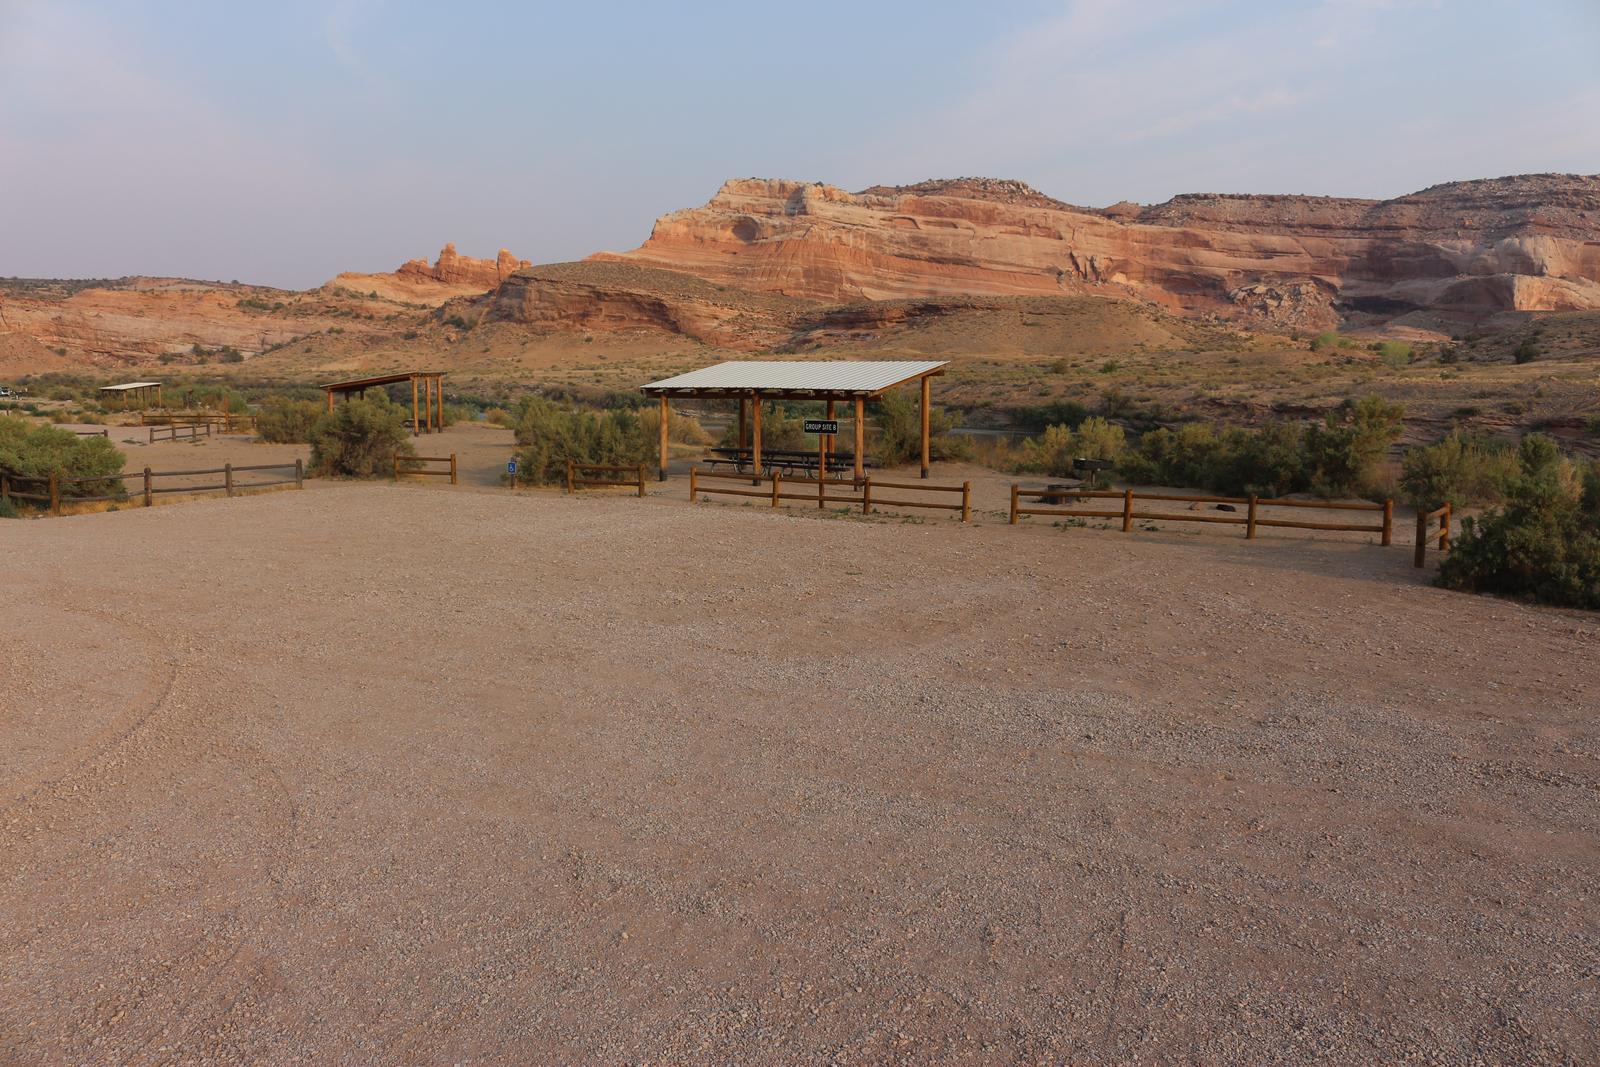 Dewey Bridge Group Site B large parking area with the Dewey Bridge Group Site B large parking area with the shade shelter and picnic tables in the near distance. Red rock cliffs line the horizon. shelter and picnic tables in the near distance.Dewey Bridge Group Site B large parking area with the shade shelter and picnic tables in the near distance. Red rock cliffs line the horizon. 